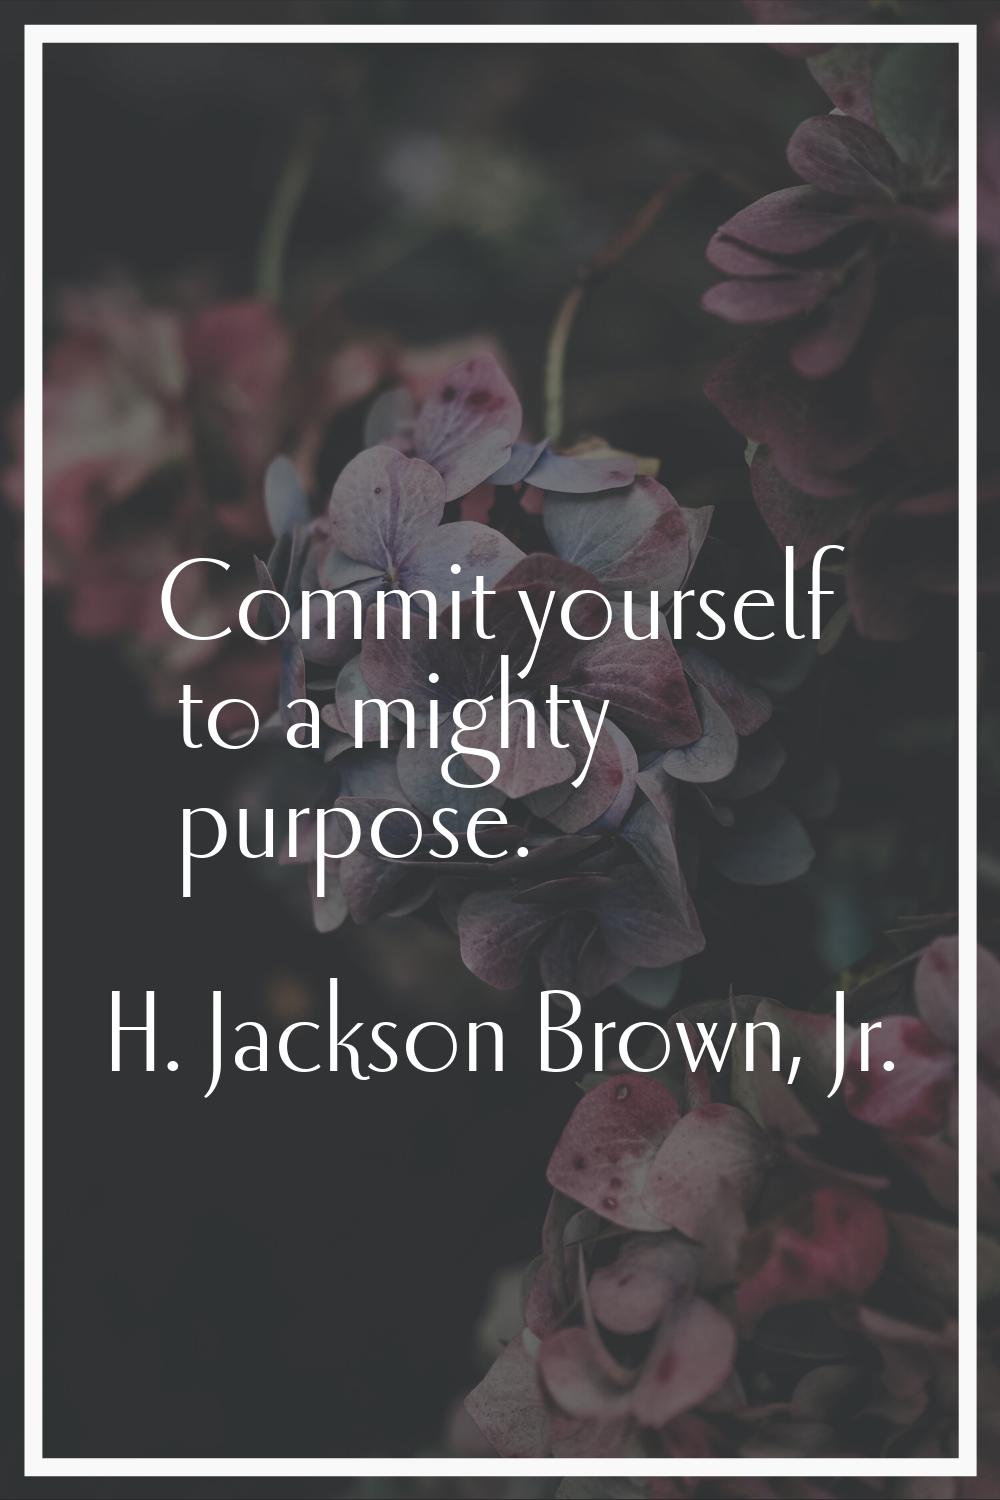 Commit yourself to a mighty purpose.